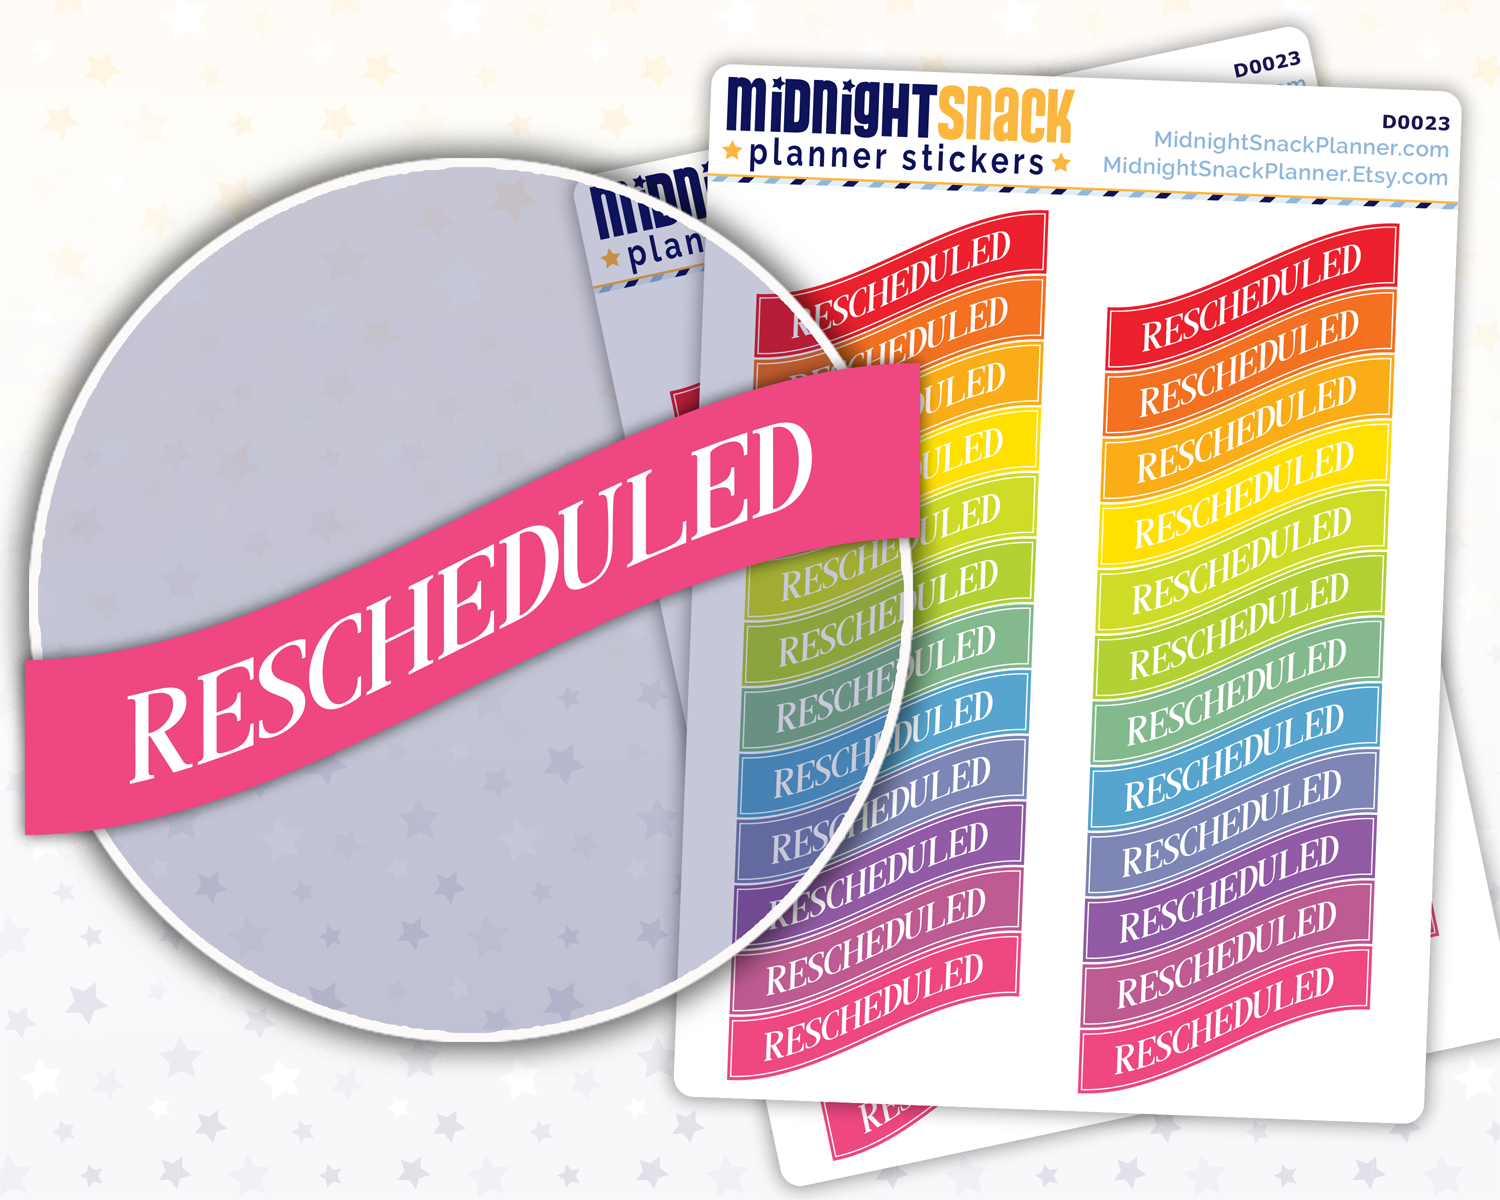 Cancelled, Rescheduled, Nope, and Not Today Banner Planner Stickers